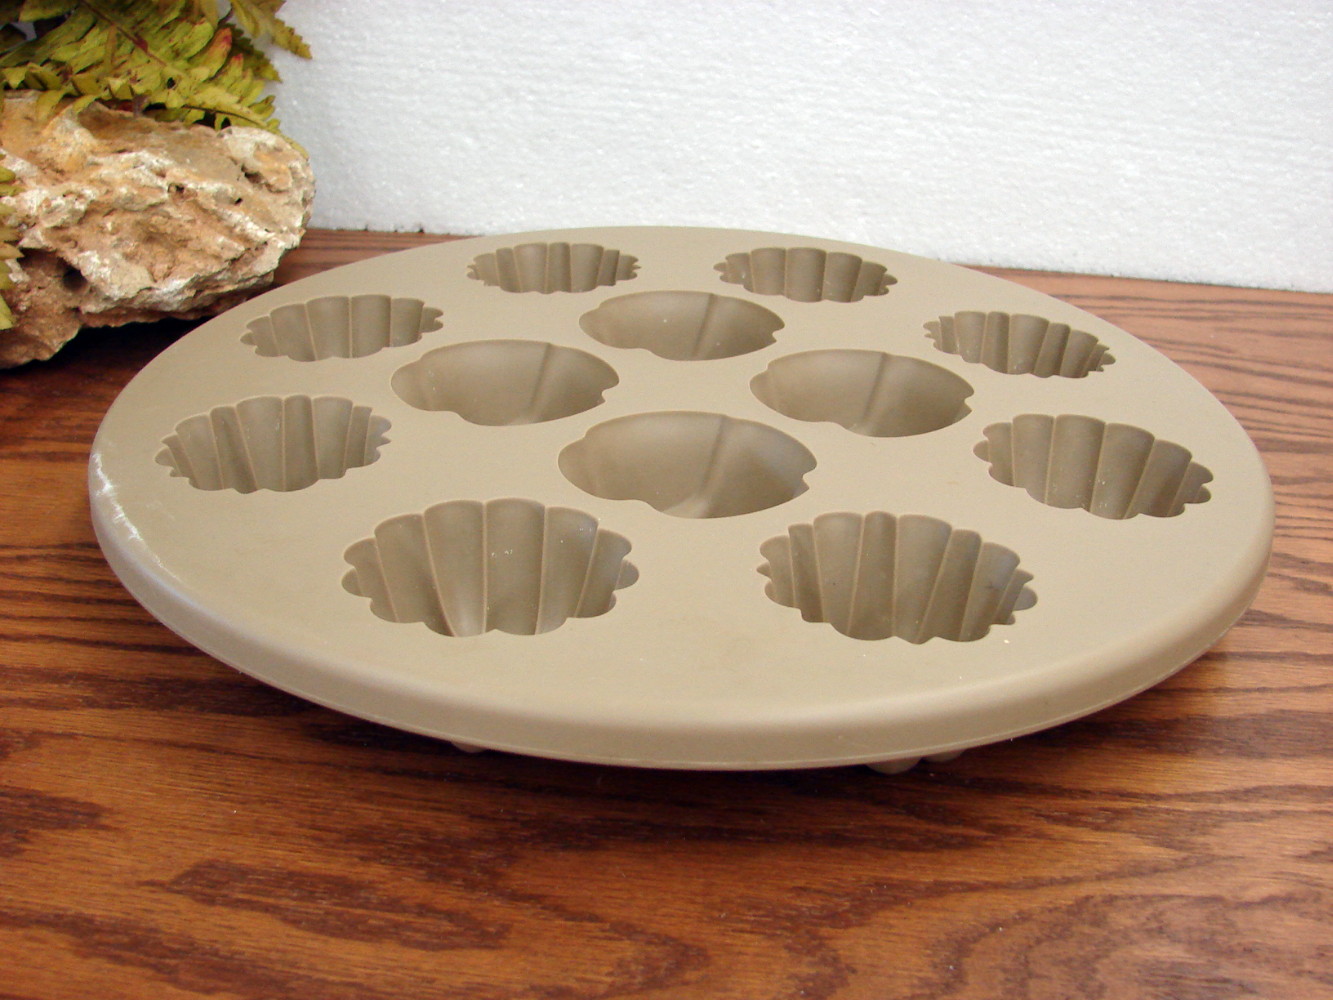 Pampered Chef Silicone Rose Flower Round Floral Cupcake Baking Mold -   Log Cabin Decor